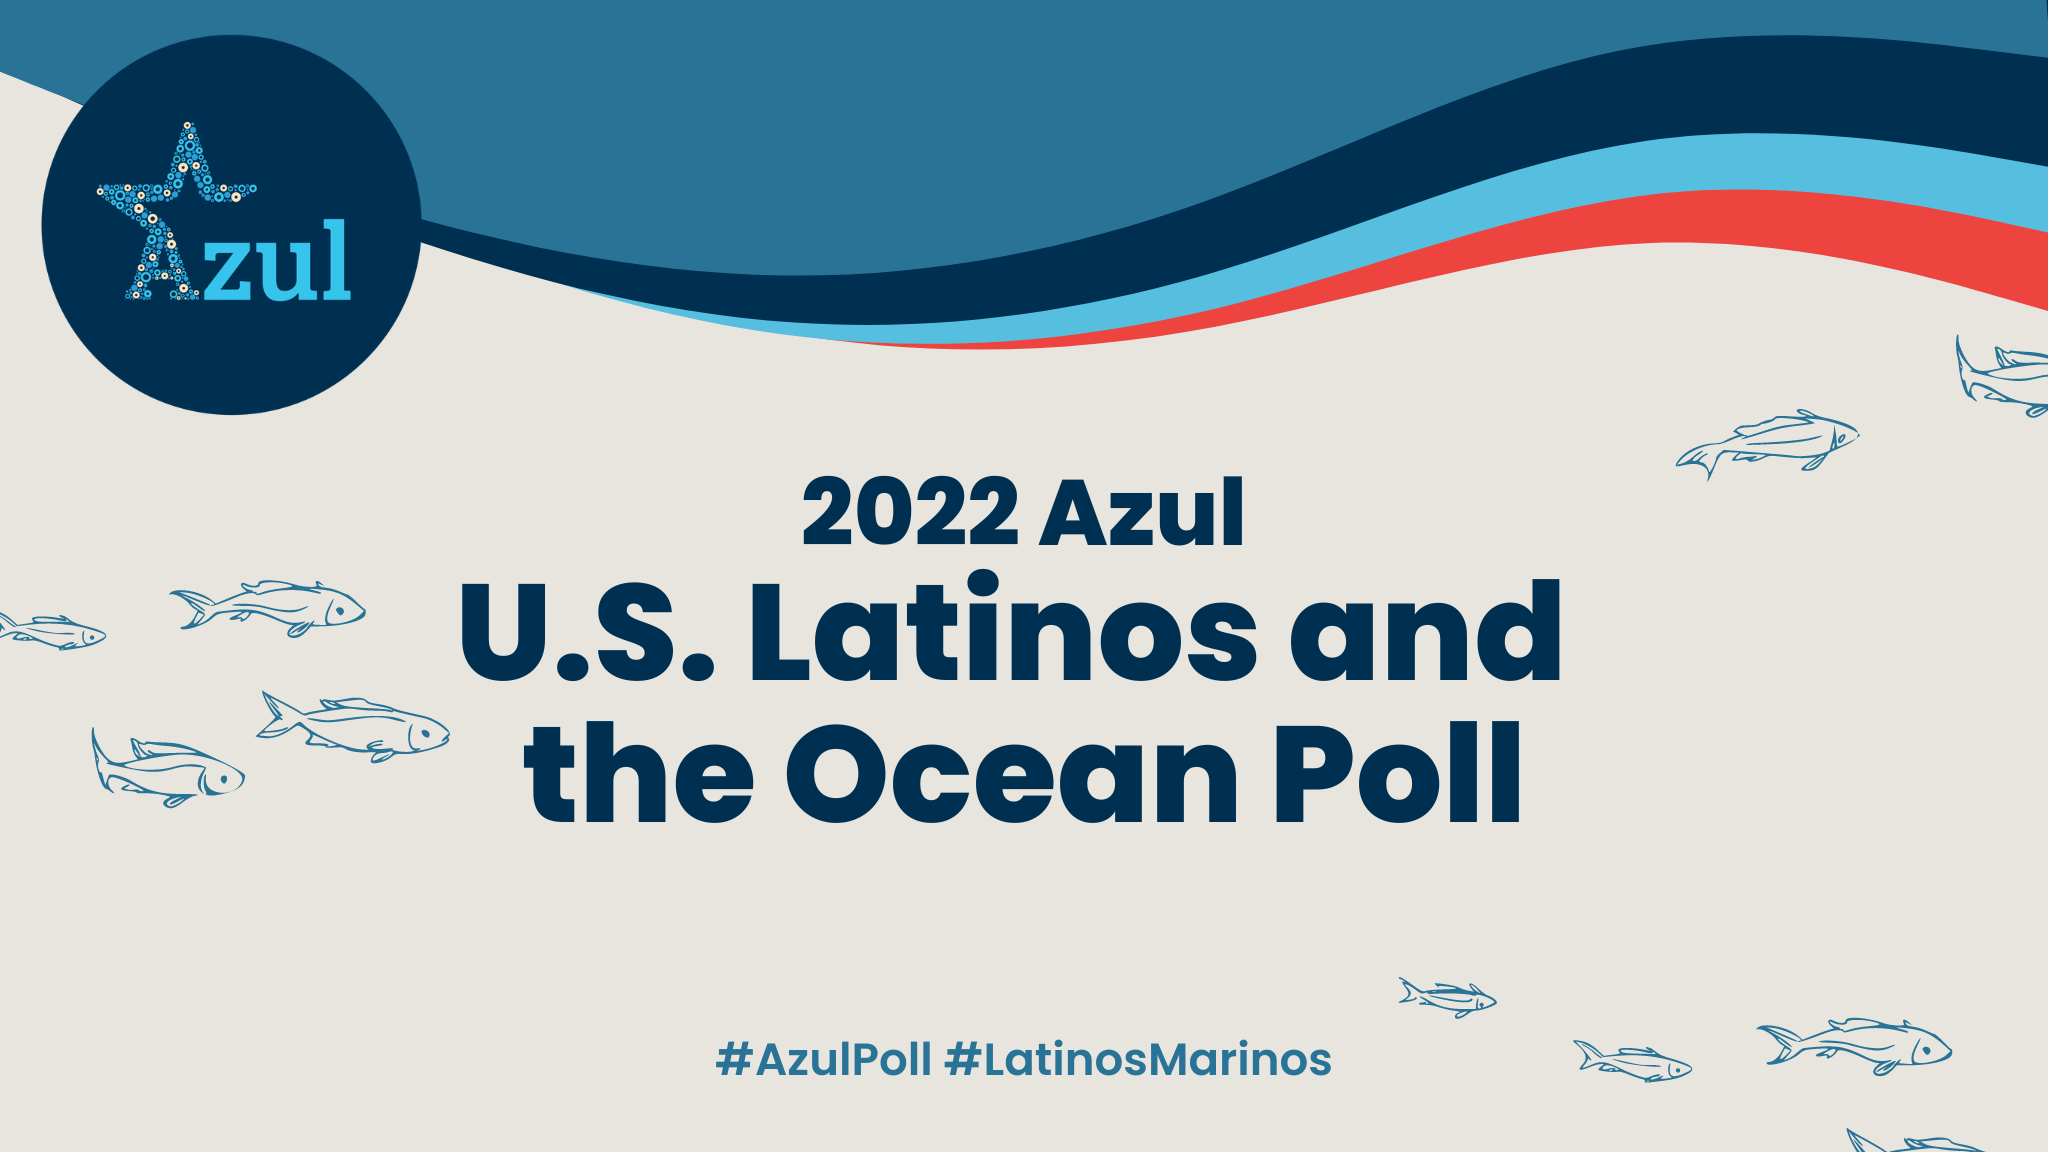 National Poll Finds U.S. Latino Voters Overwhelmingly Support Policies to Protect the Ocean and Act on Plastic Pollution